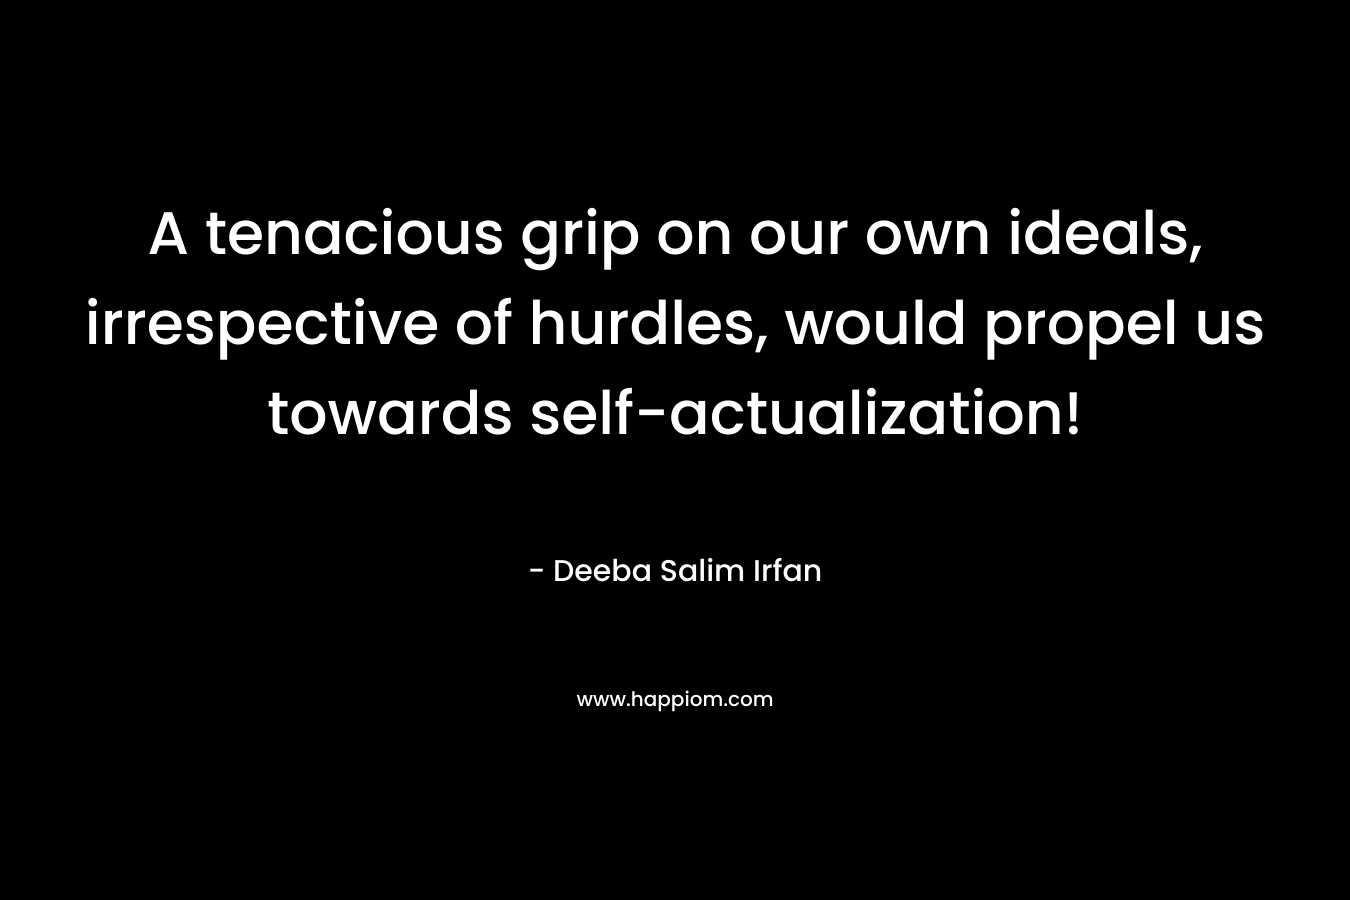 A tenacious grip on our own ideals, irrespective of hurdles, would propel us towards self-actualization!